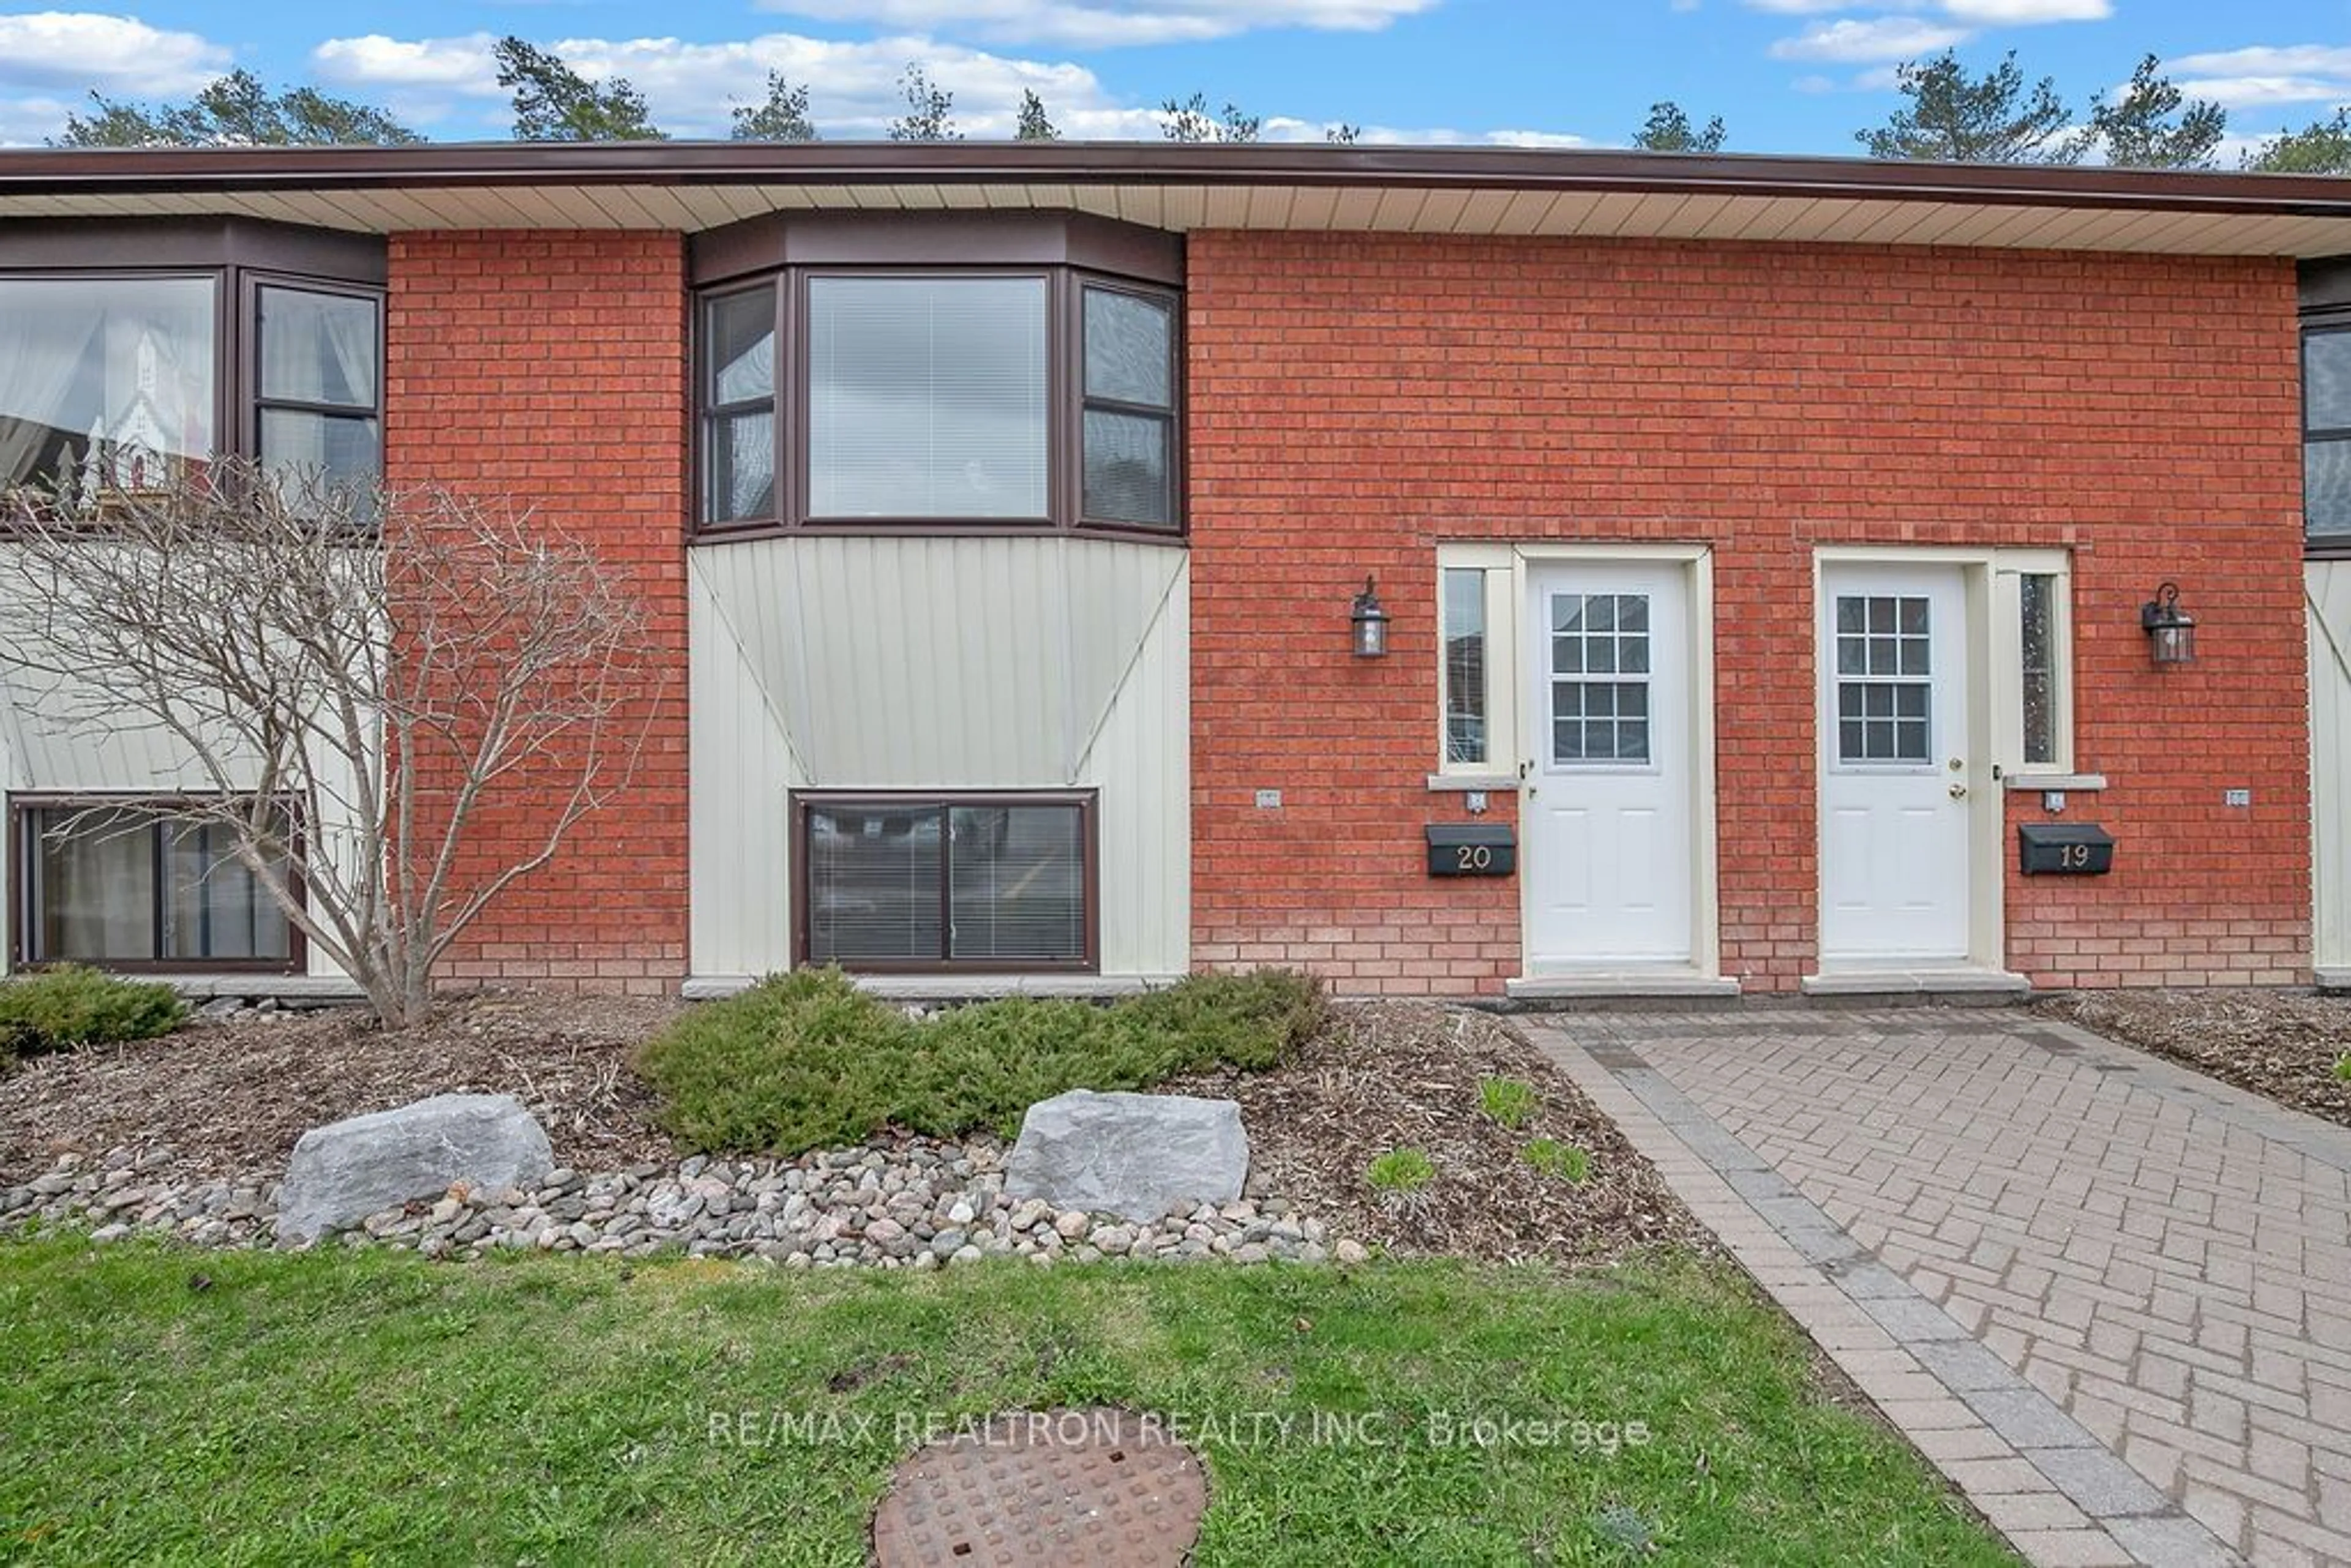 Home with brick exterior material for 115 Mary St #20, Kawartha Lakes Ontario K9V 2N7